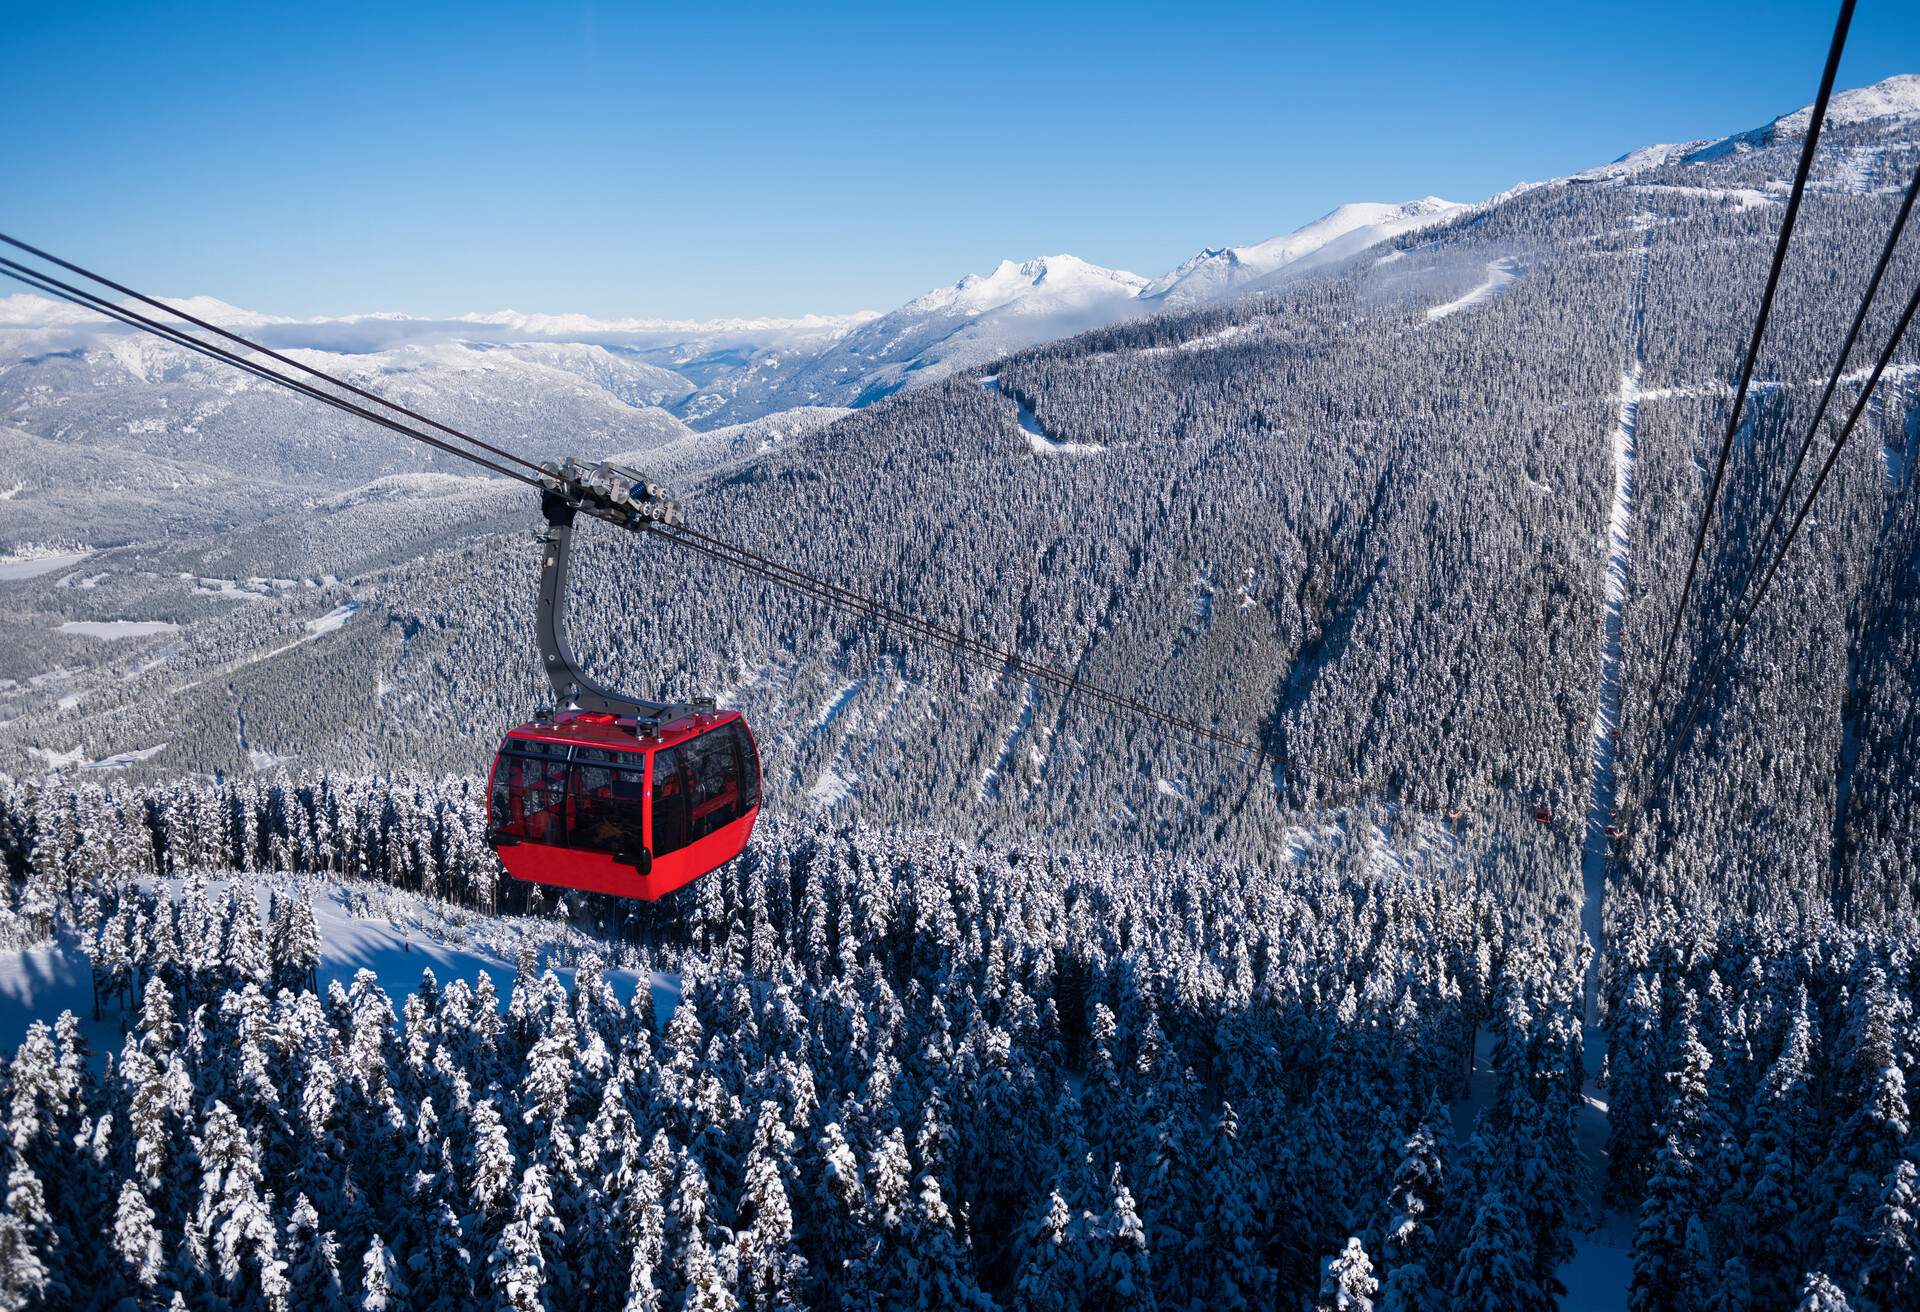 A red cable car suspended in mid-air above the terrain of a forest covered in snow.